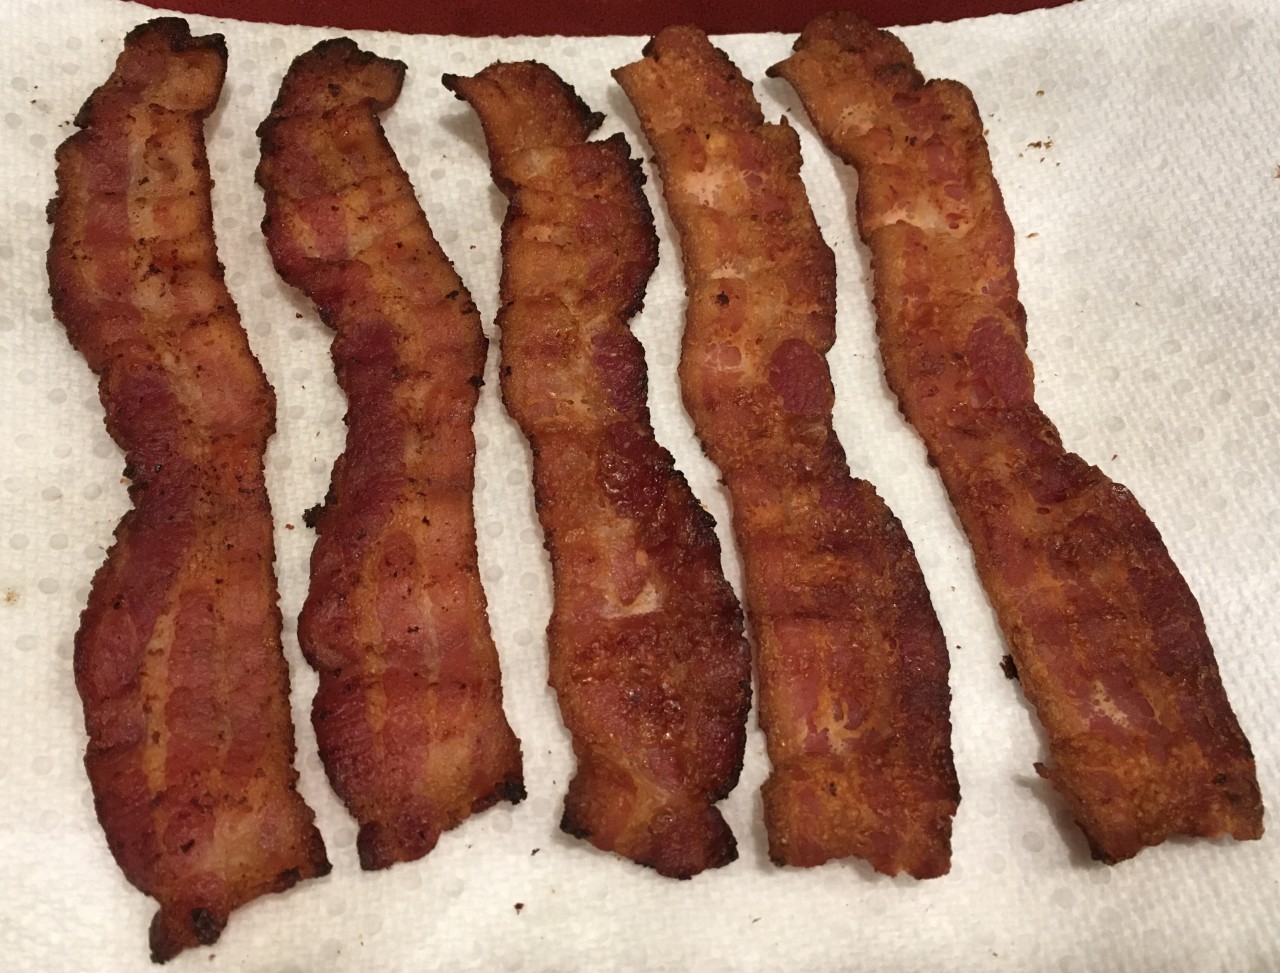 Doesn't everyone love bacon?